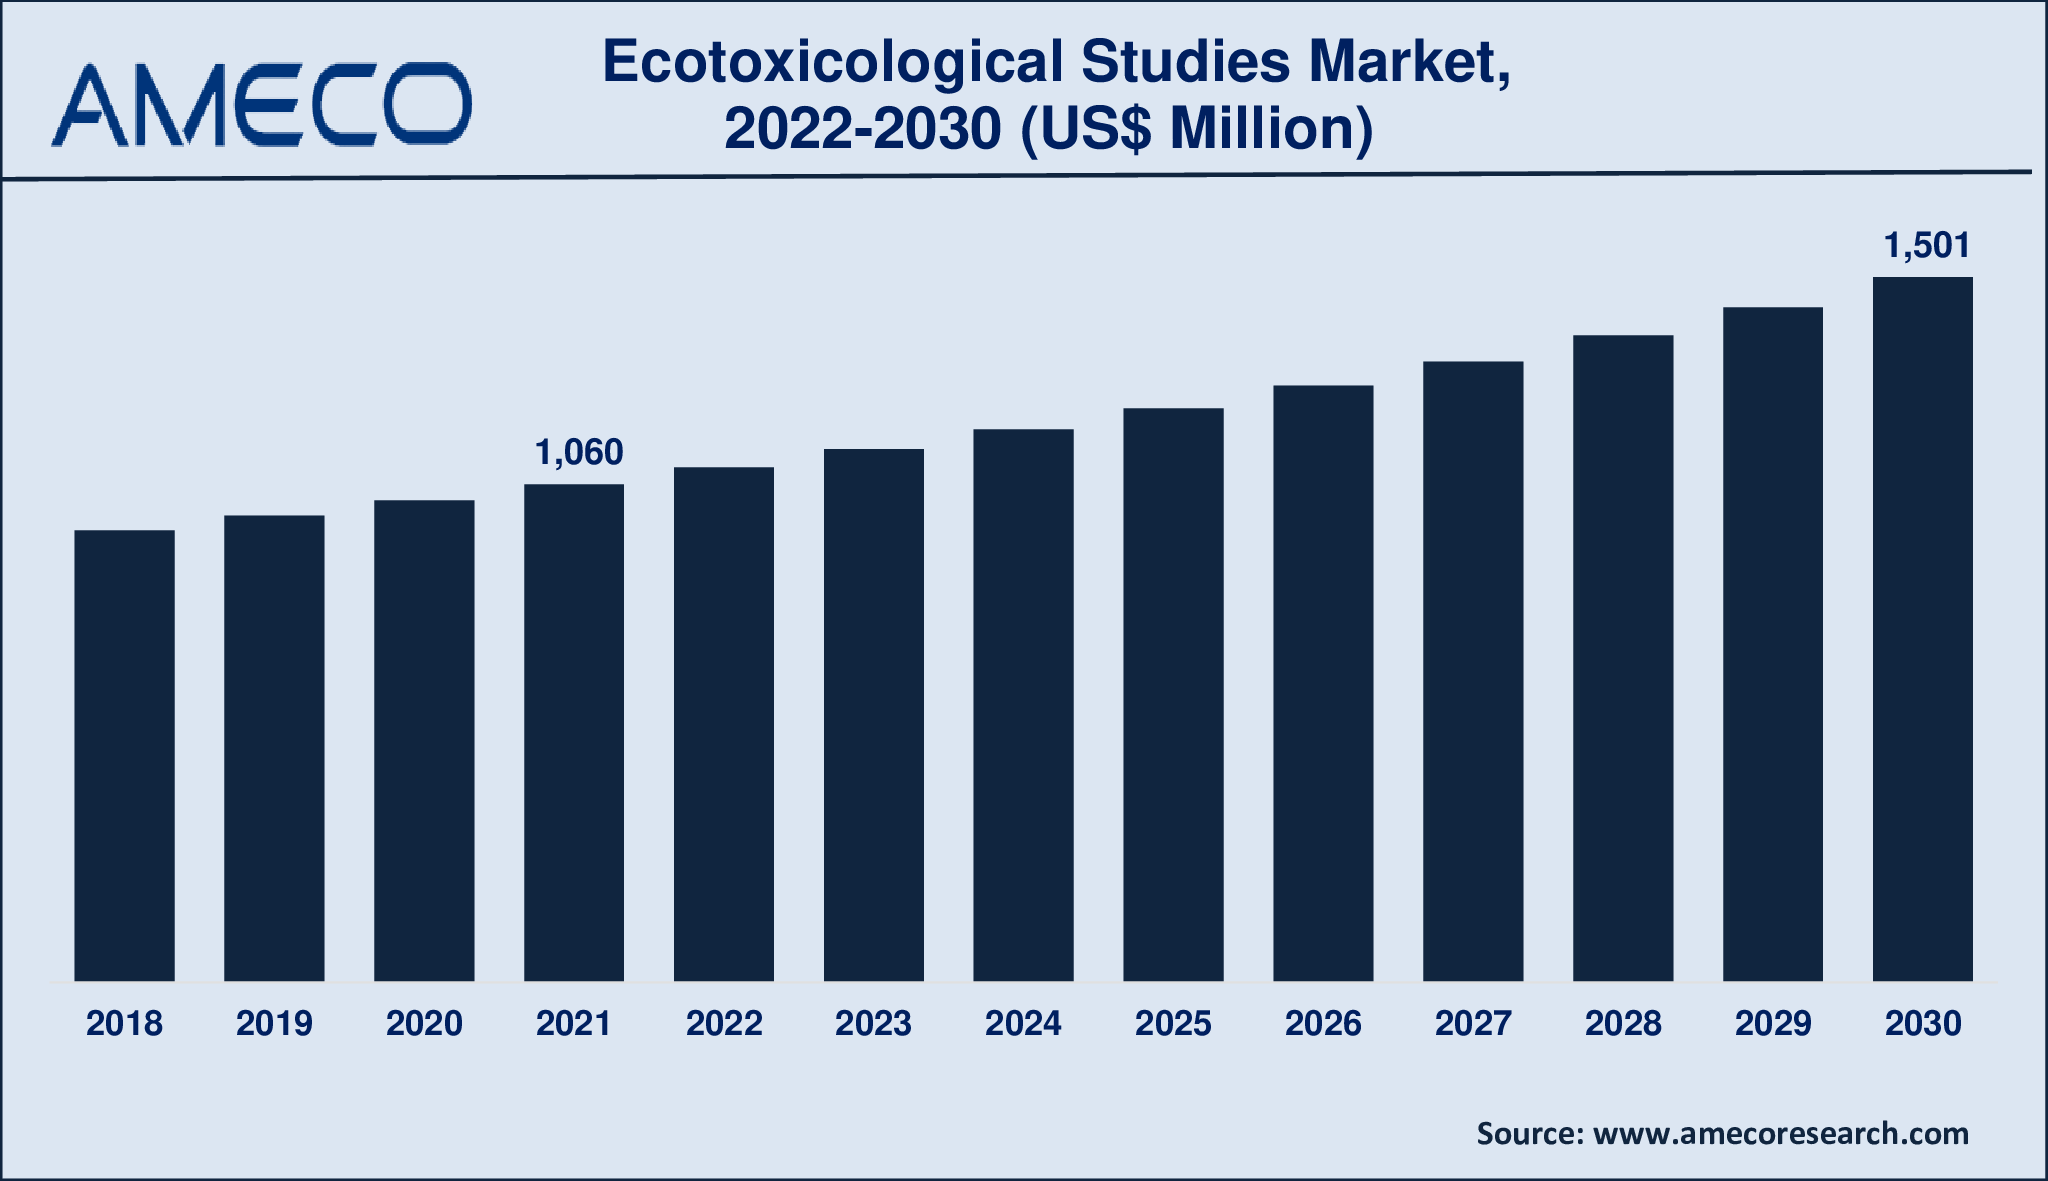 Ecotoxicological Studies Market Size, Share, Growth, Trends, and Forecast 2022-2030